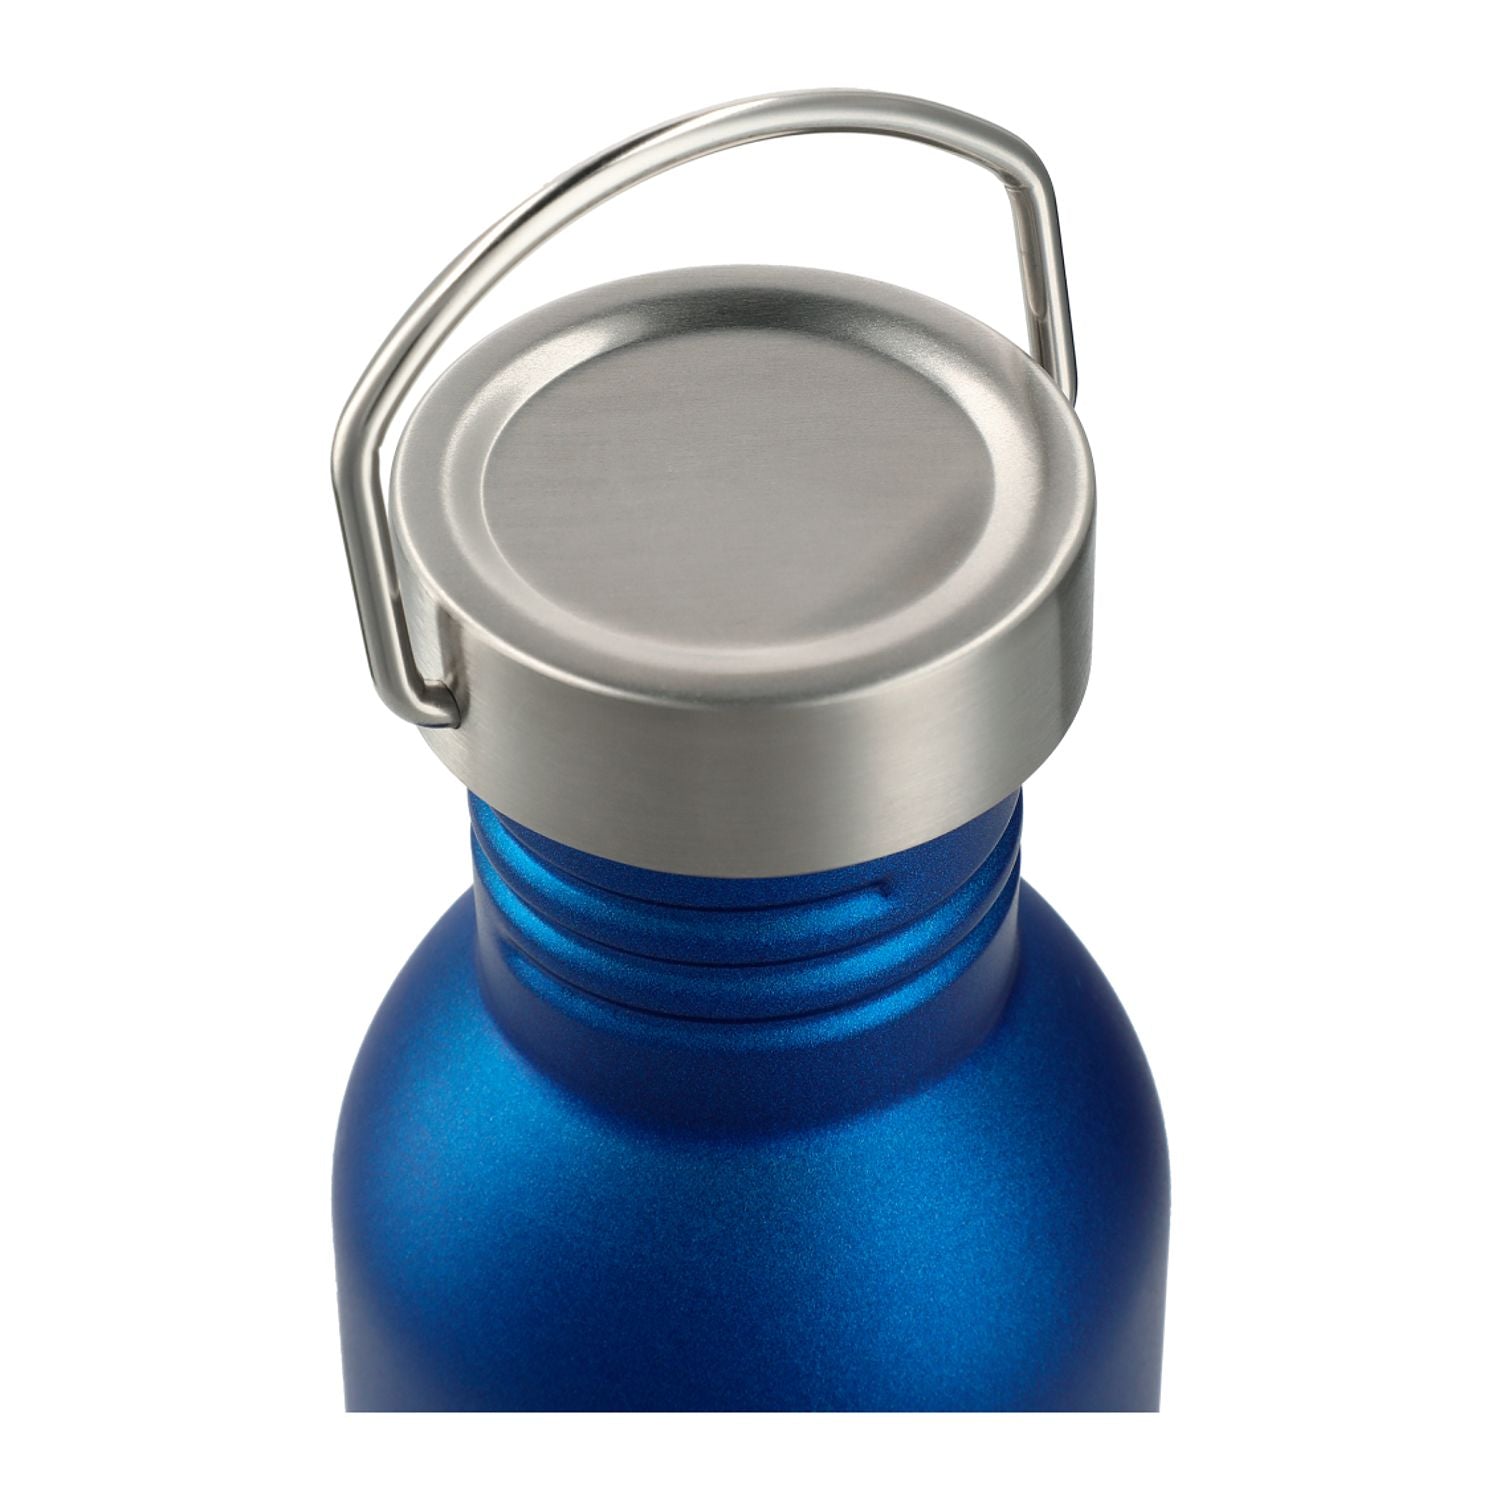 Thor 20 oz Stainless Steel Single-Walled Sports Bottle lid